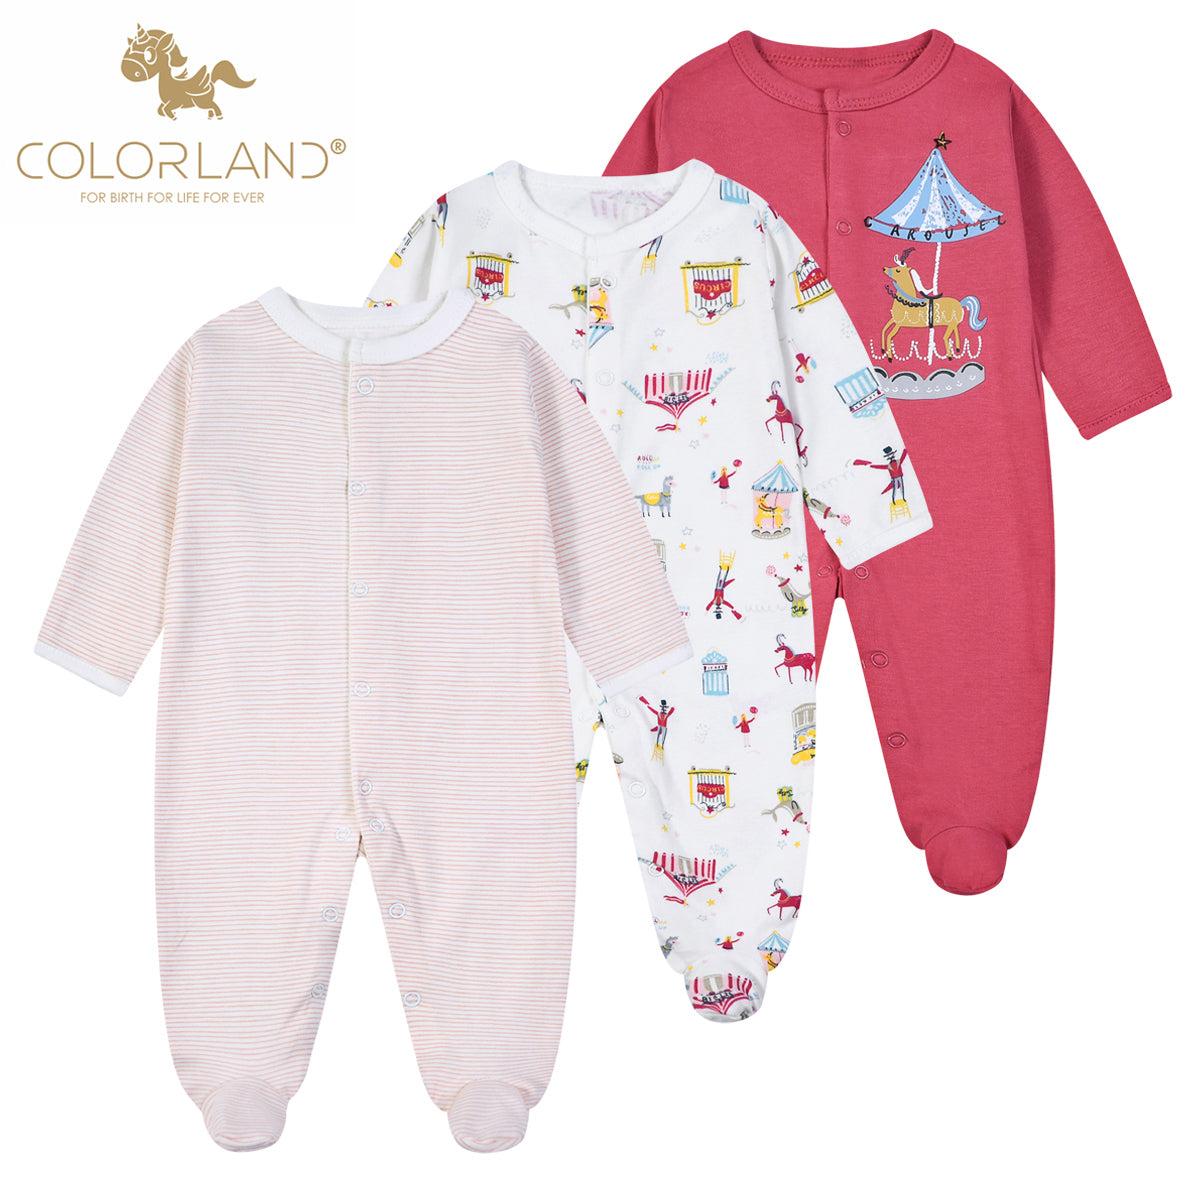 3-pack Colorland Unisex Baby Long Sleeve Sleepsuits Rompers